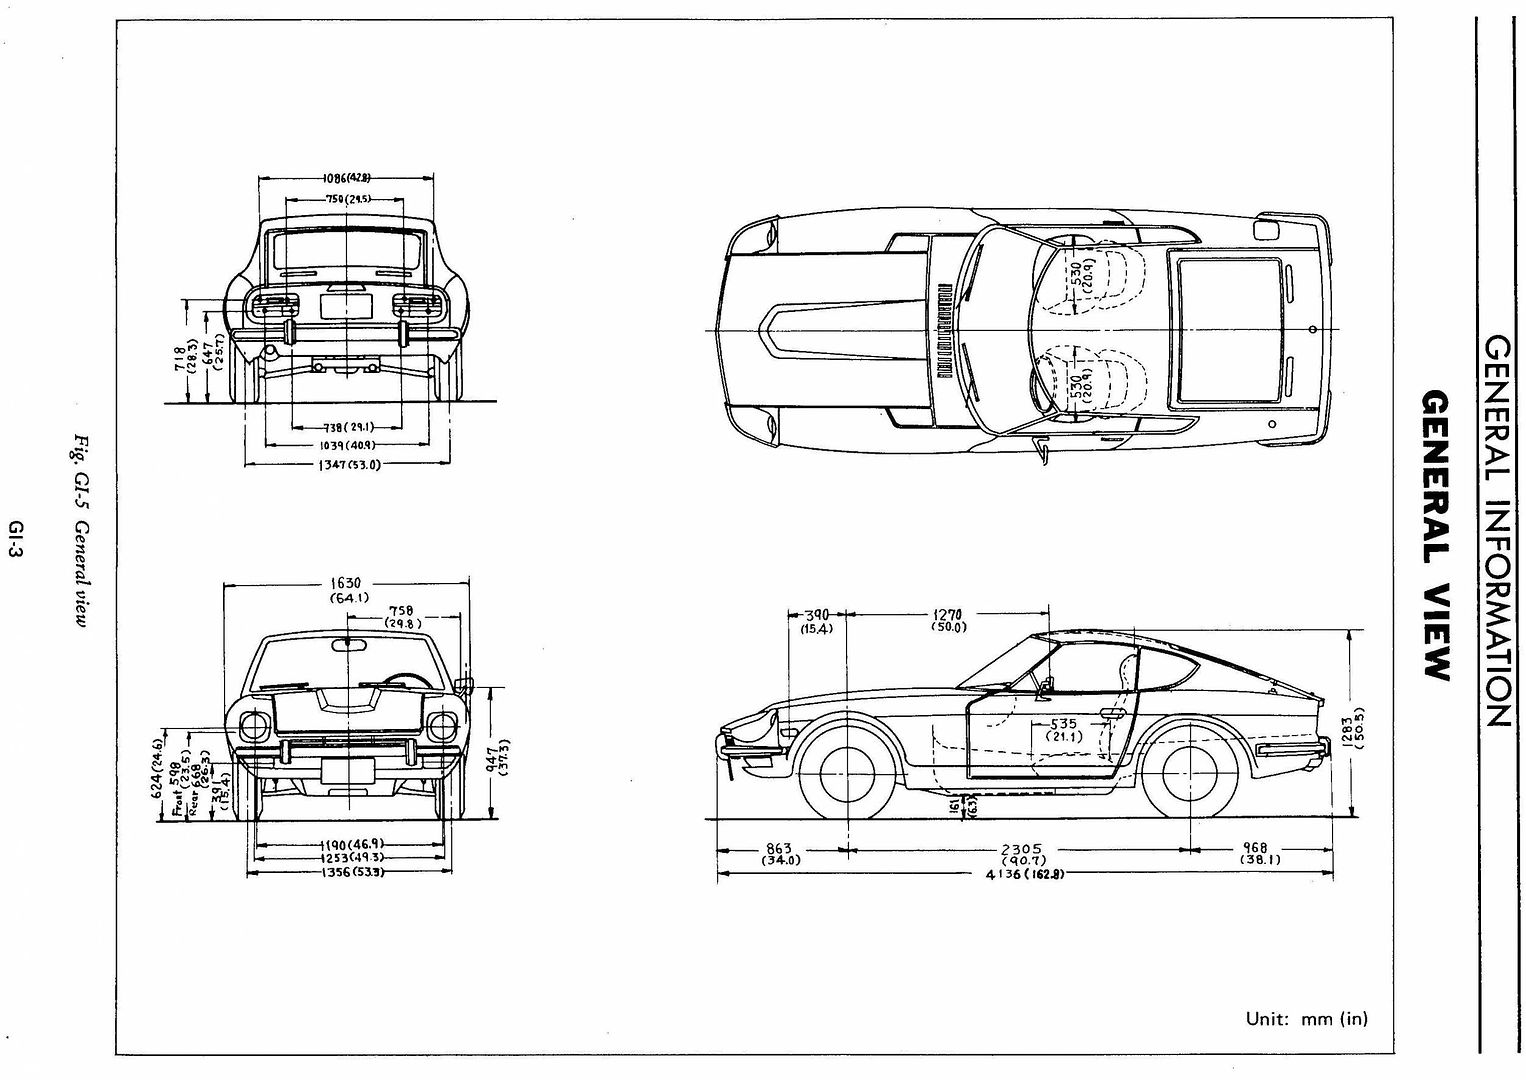 240Z_General_Chassis_VIew.jpg